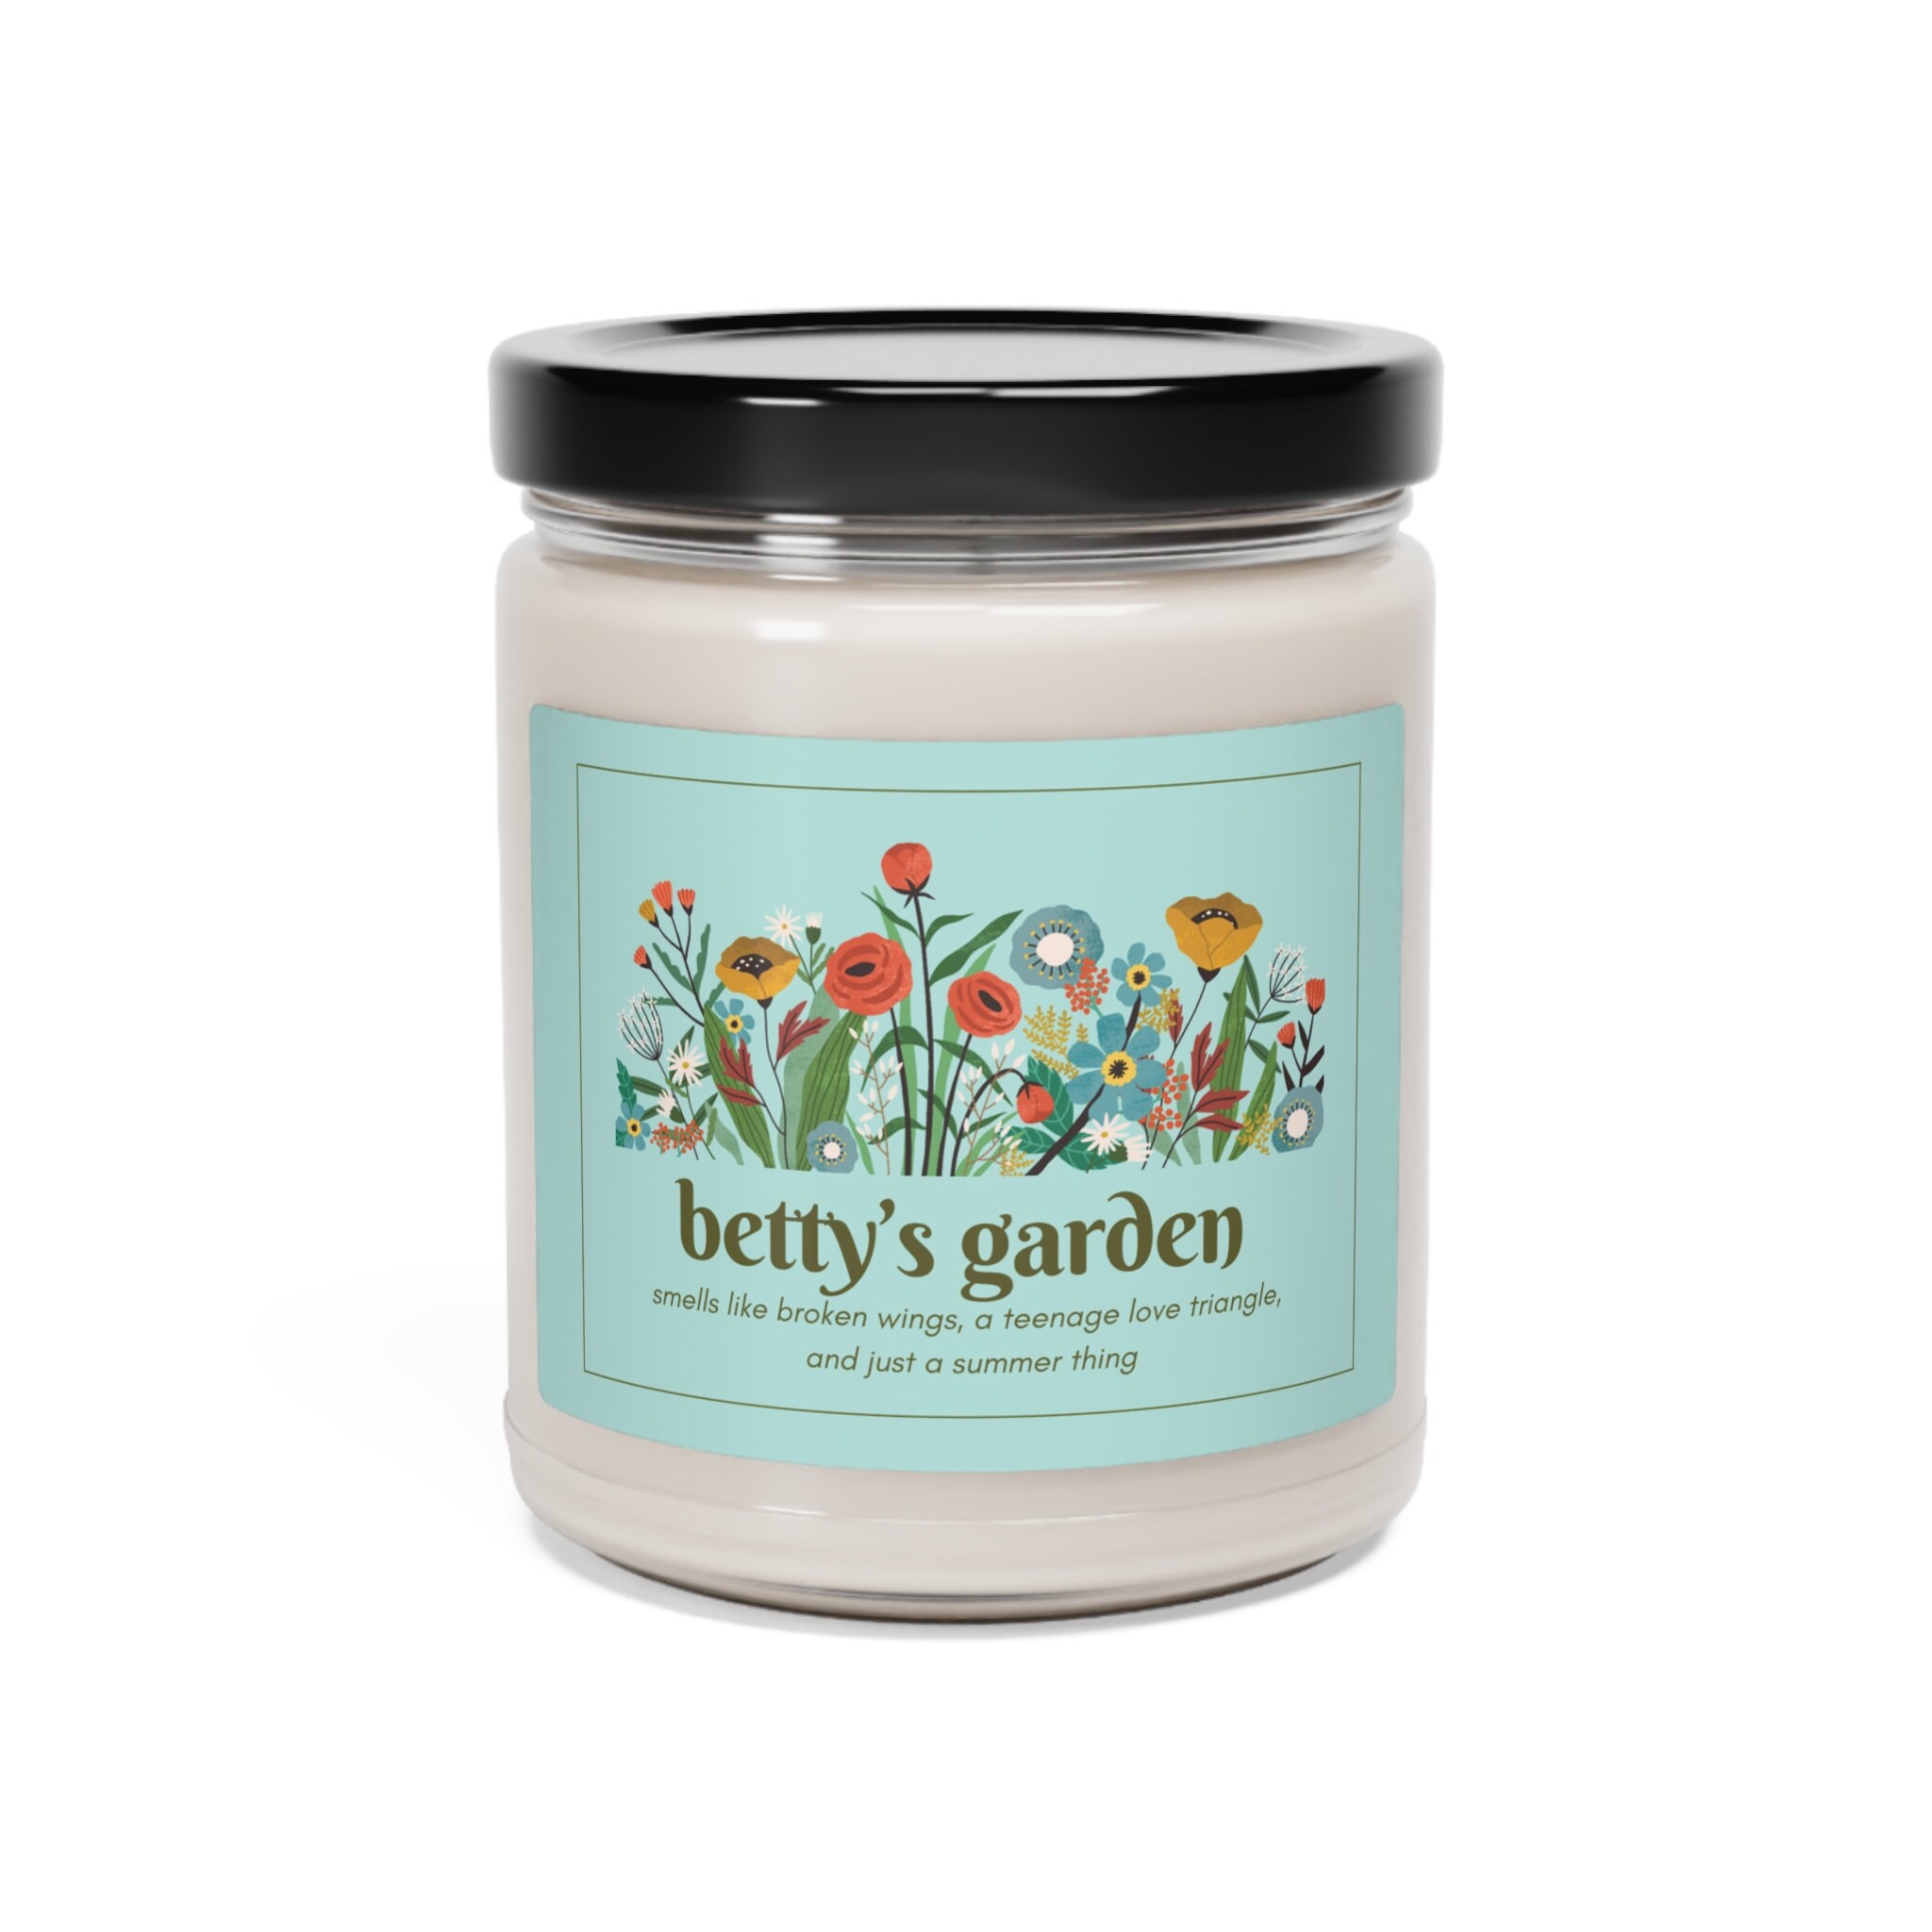 Betty's garden, folklore, Taylor Scented Candle